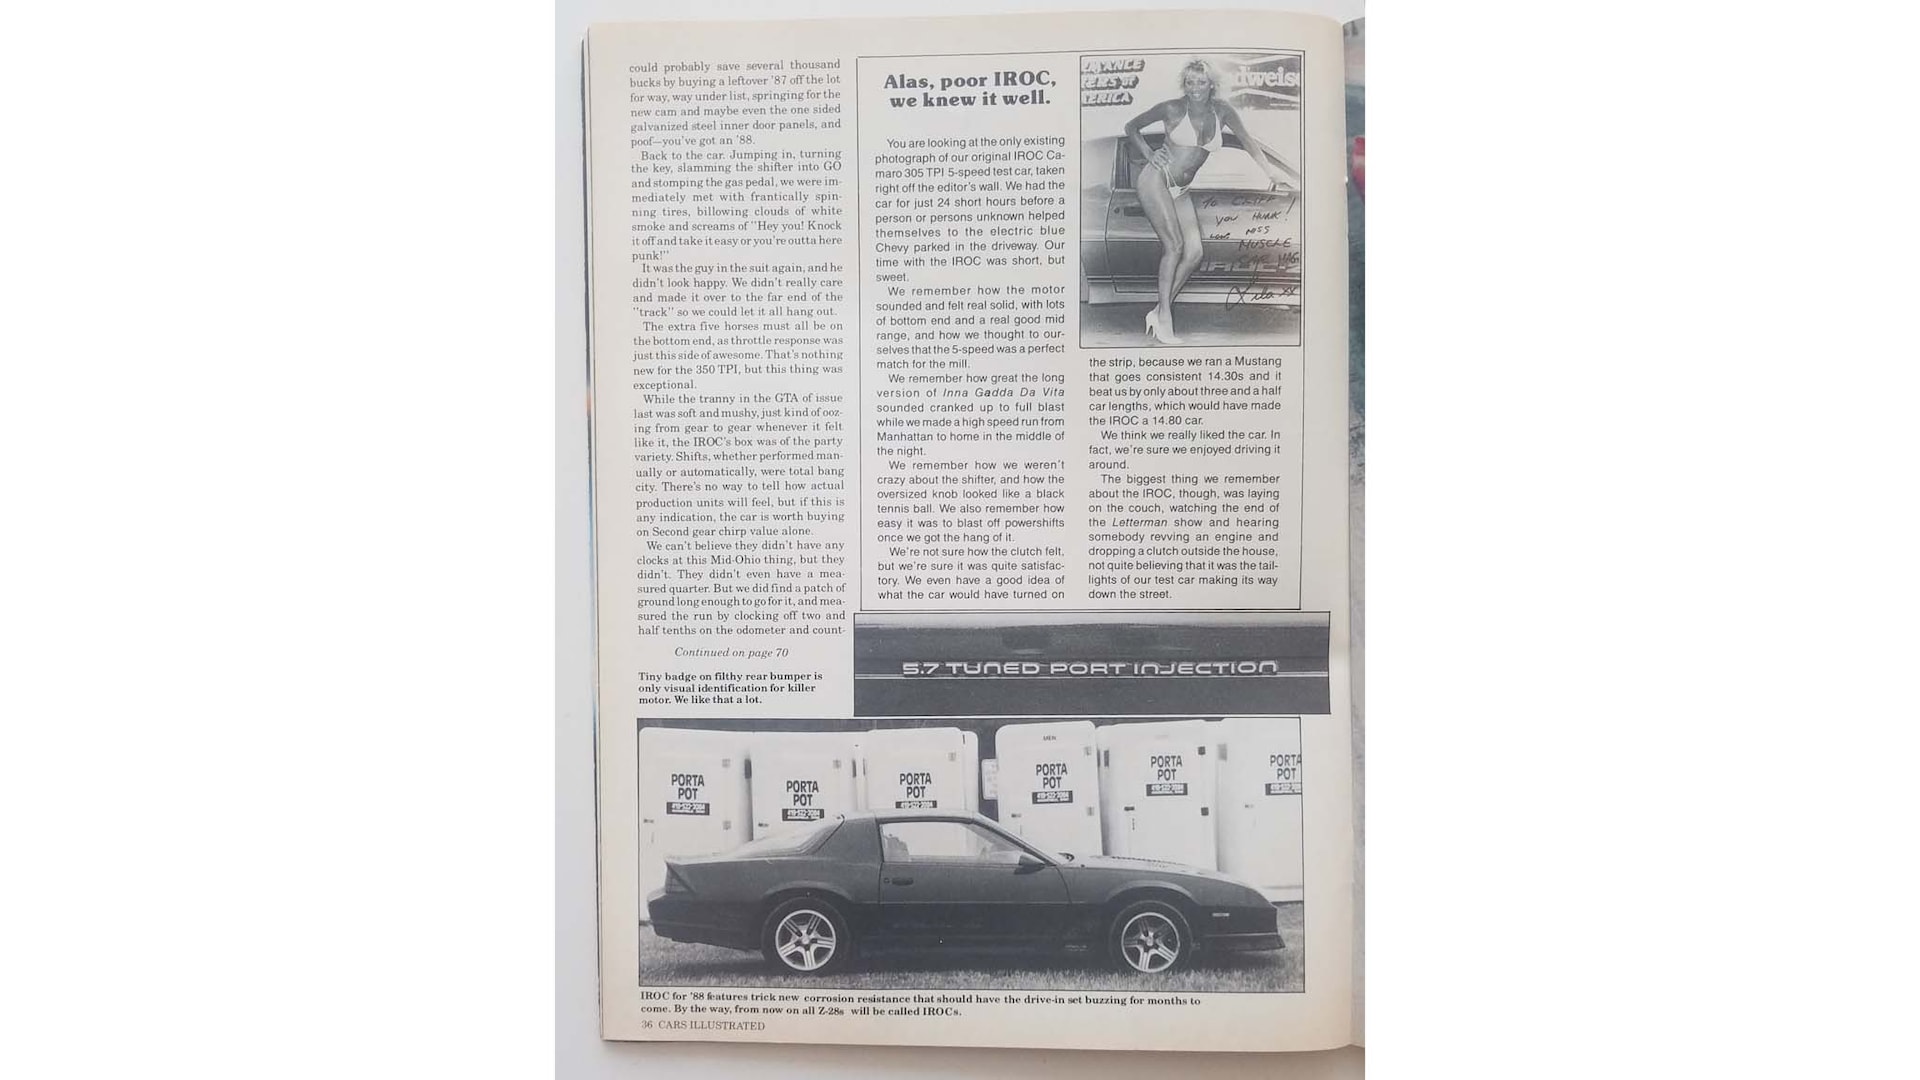 007 cars illustrated 1988 iroc review 3